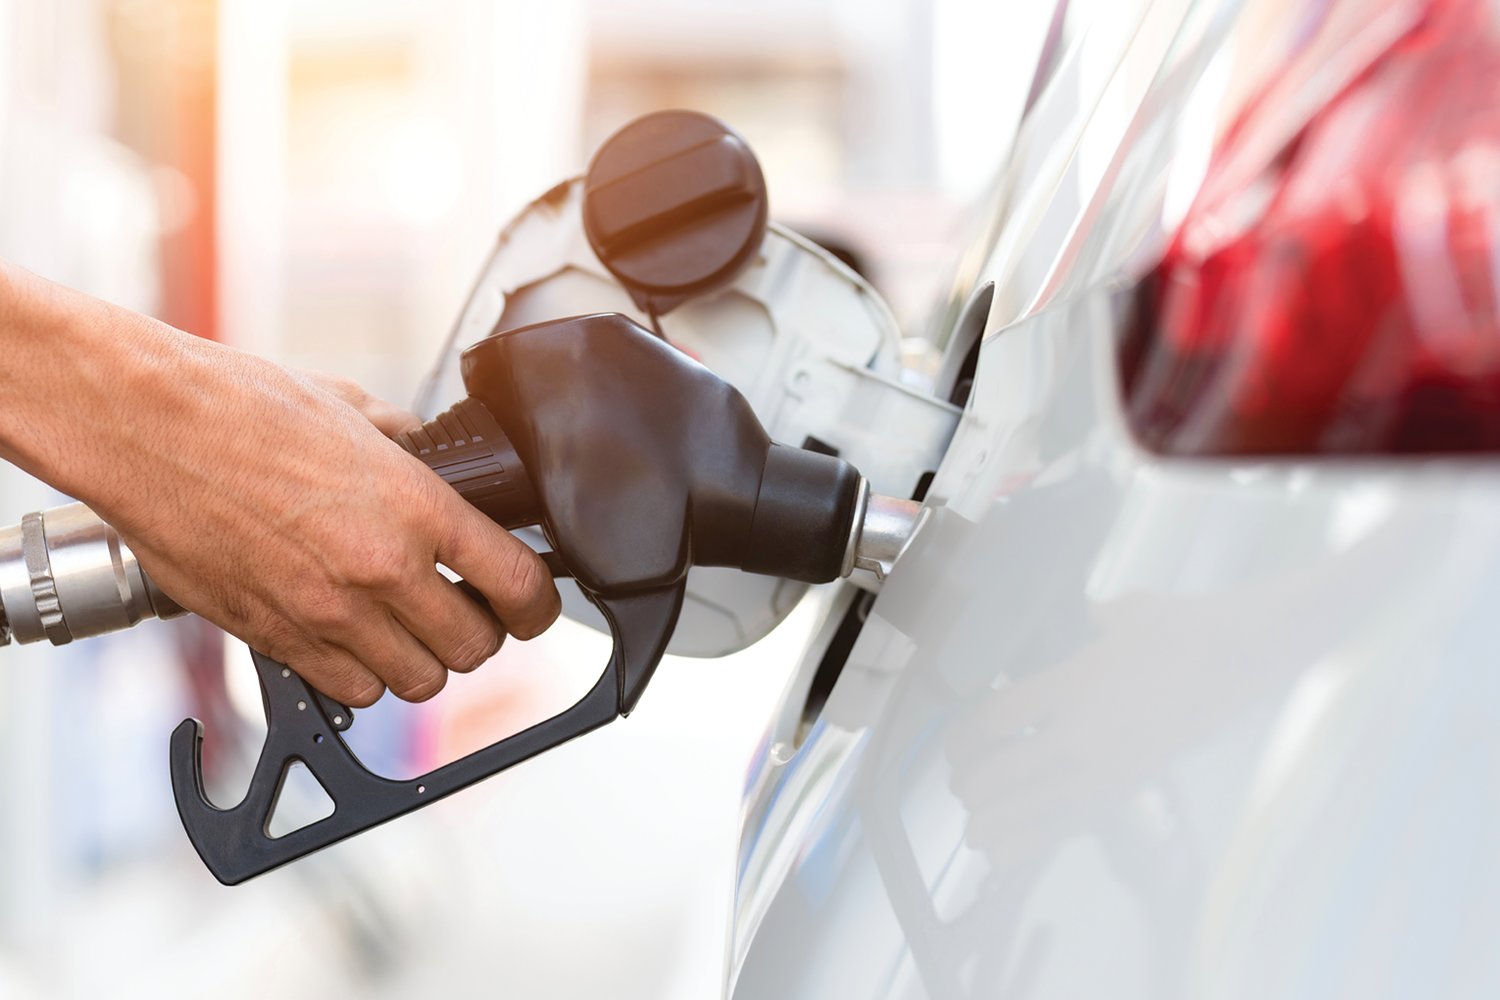 A 16-week stretch of falling gas prices has come to an end with the average price in New York increasing 5 cents from last week, rising to an average price of $3.64 per gallon.